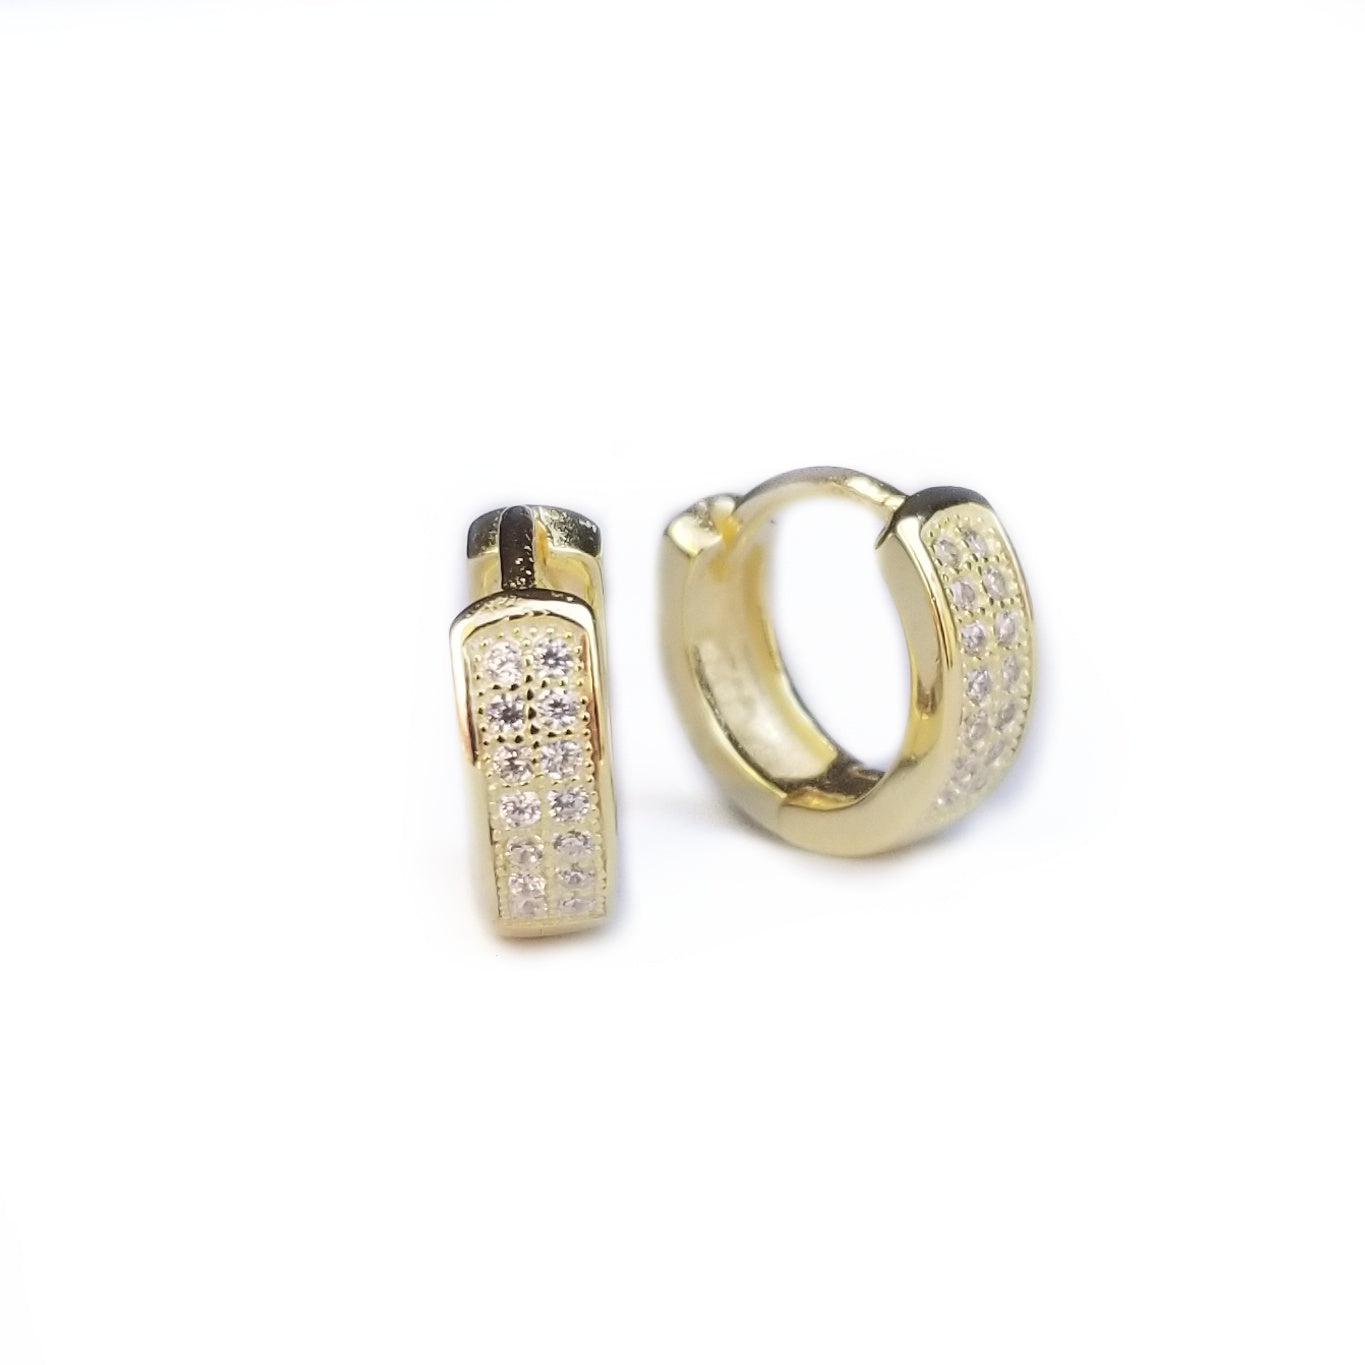 Huggy style earring sterling silver gold plated